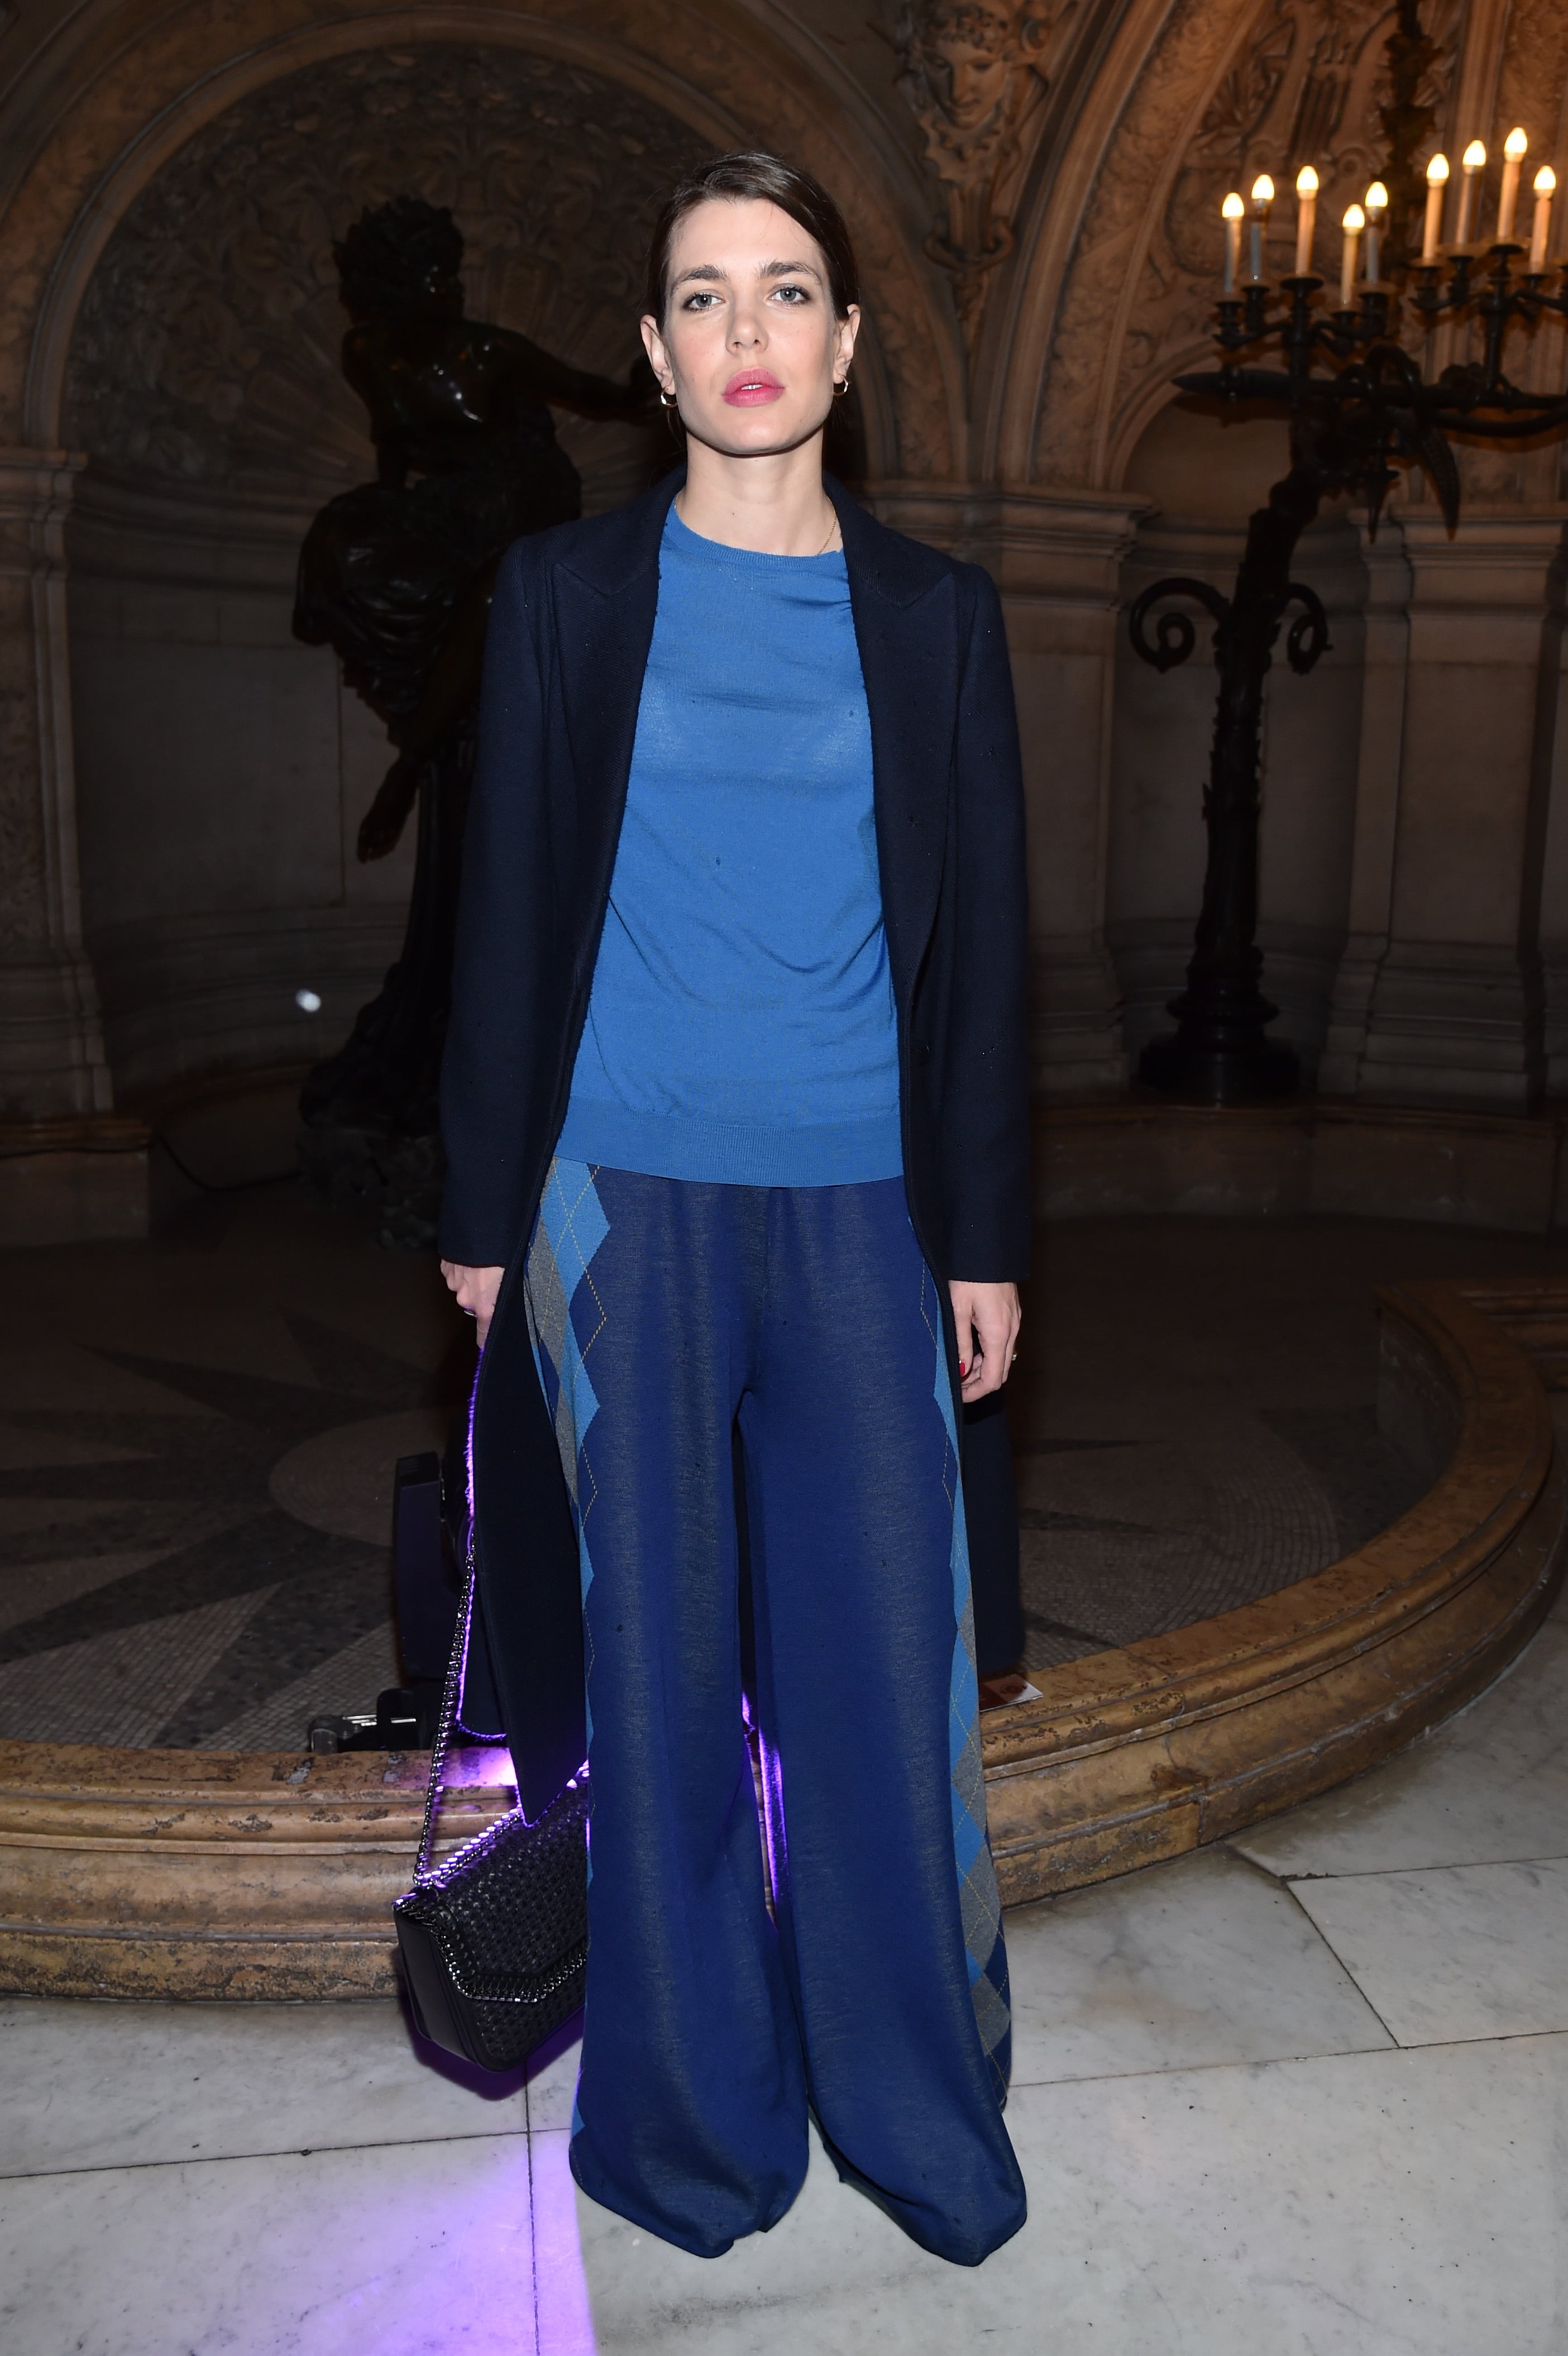 A guest wearing Yves Saint Laurent clutch and blue suit during News  Photo - Getty Images